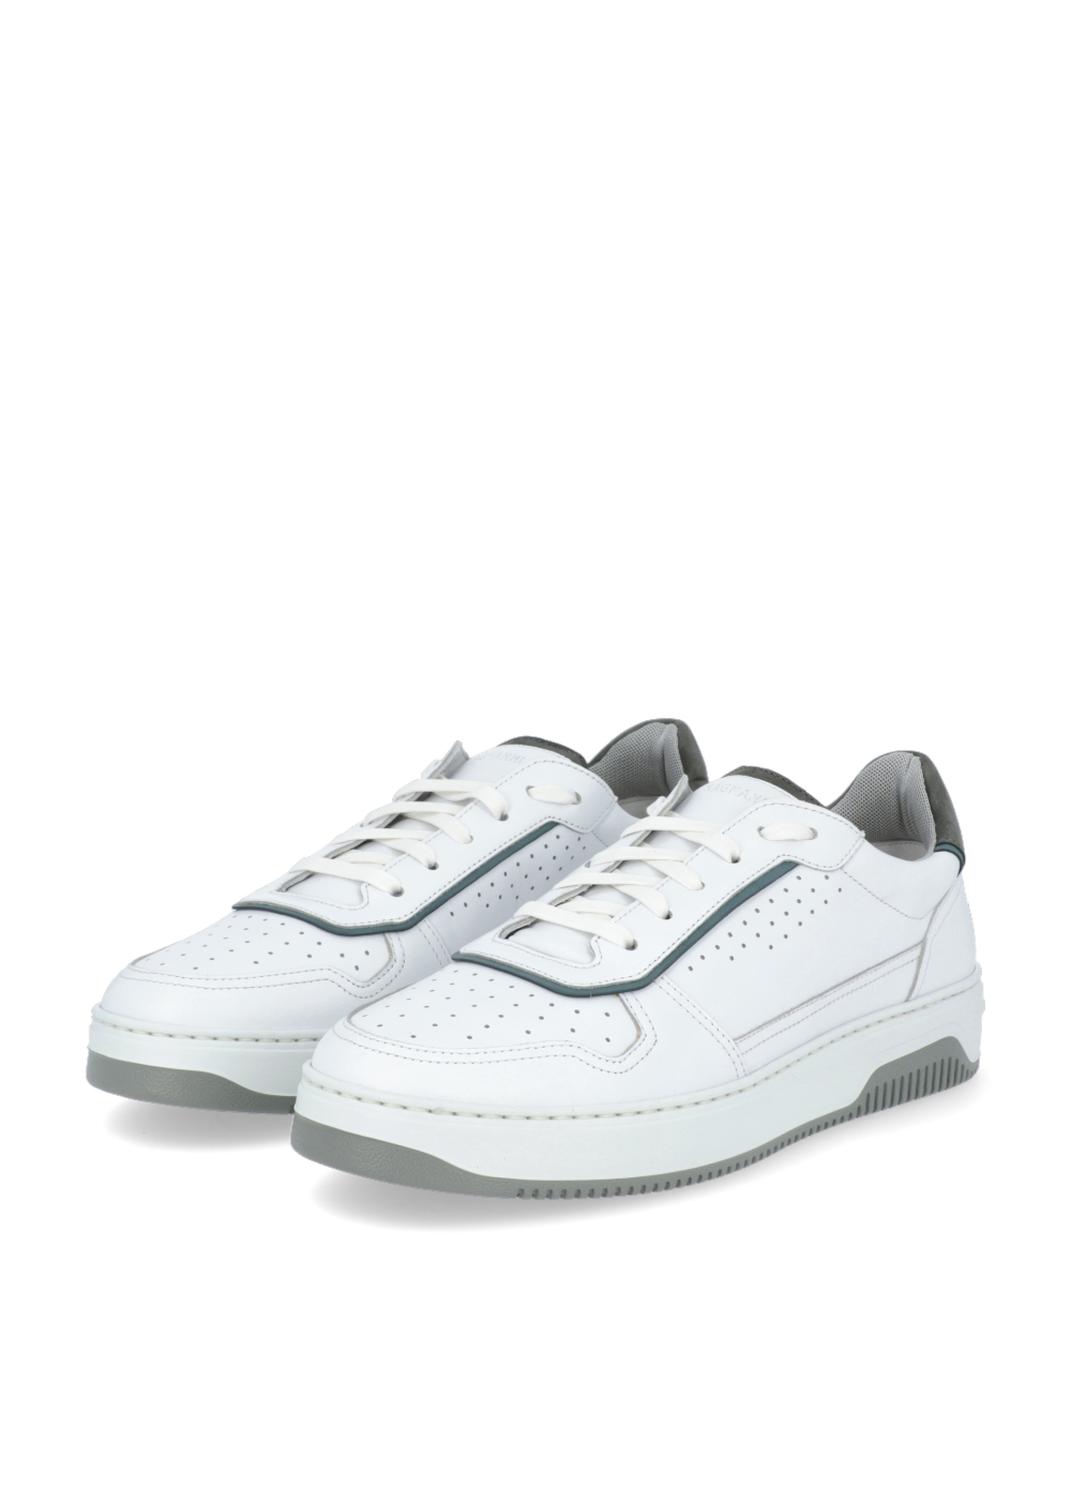 Magnanni Sneakers MGN-25627